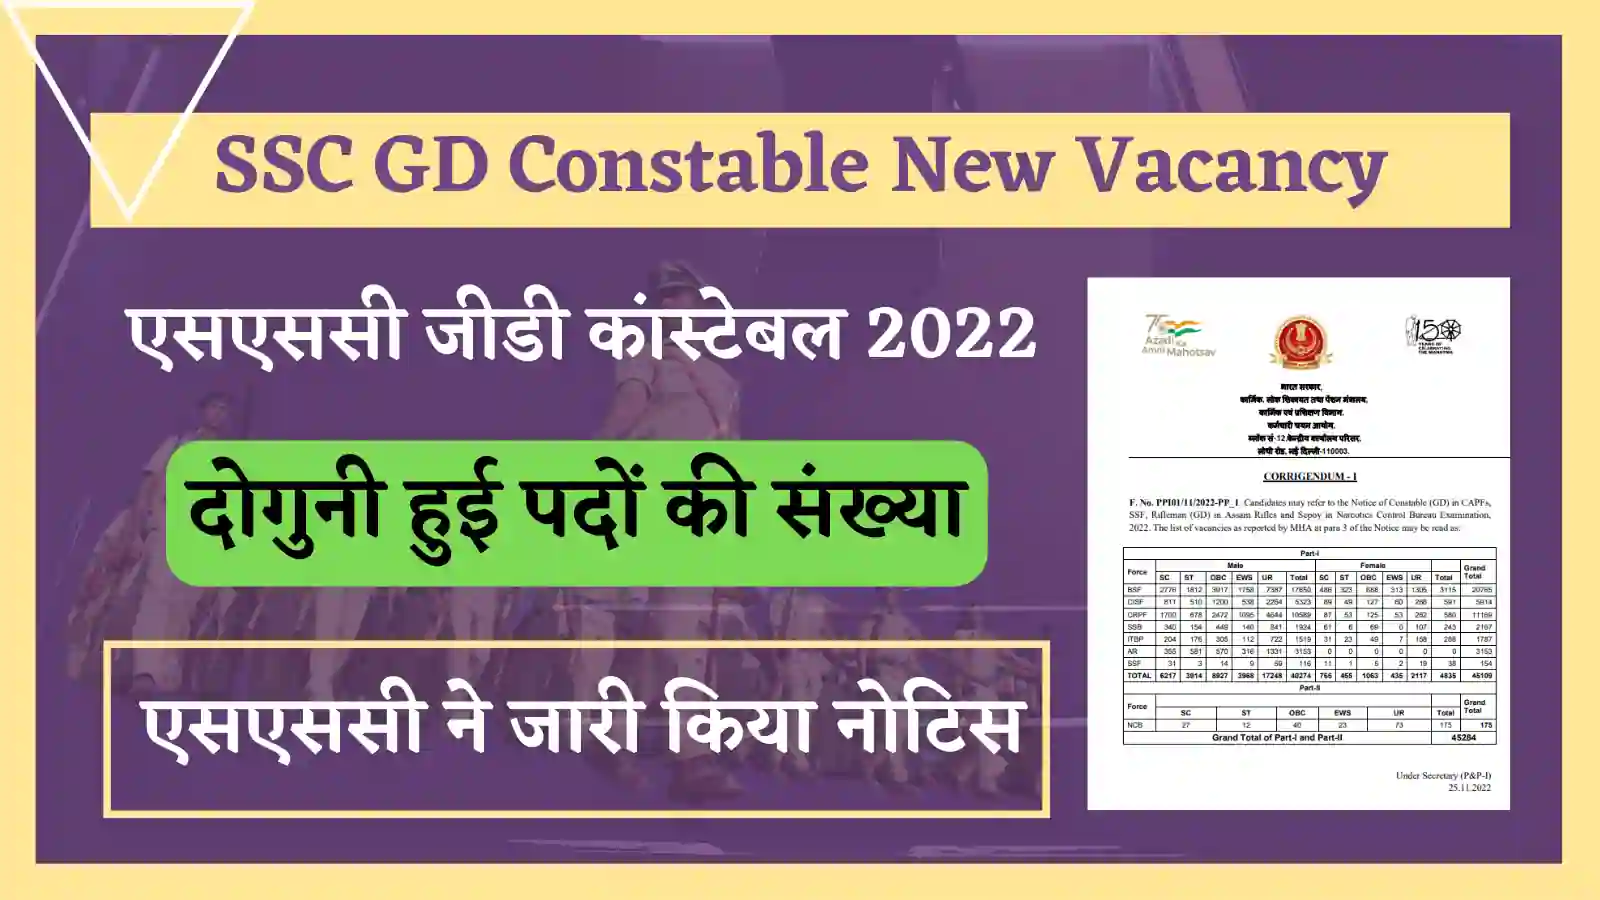 ssc gd constable new vacancy